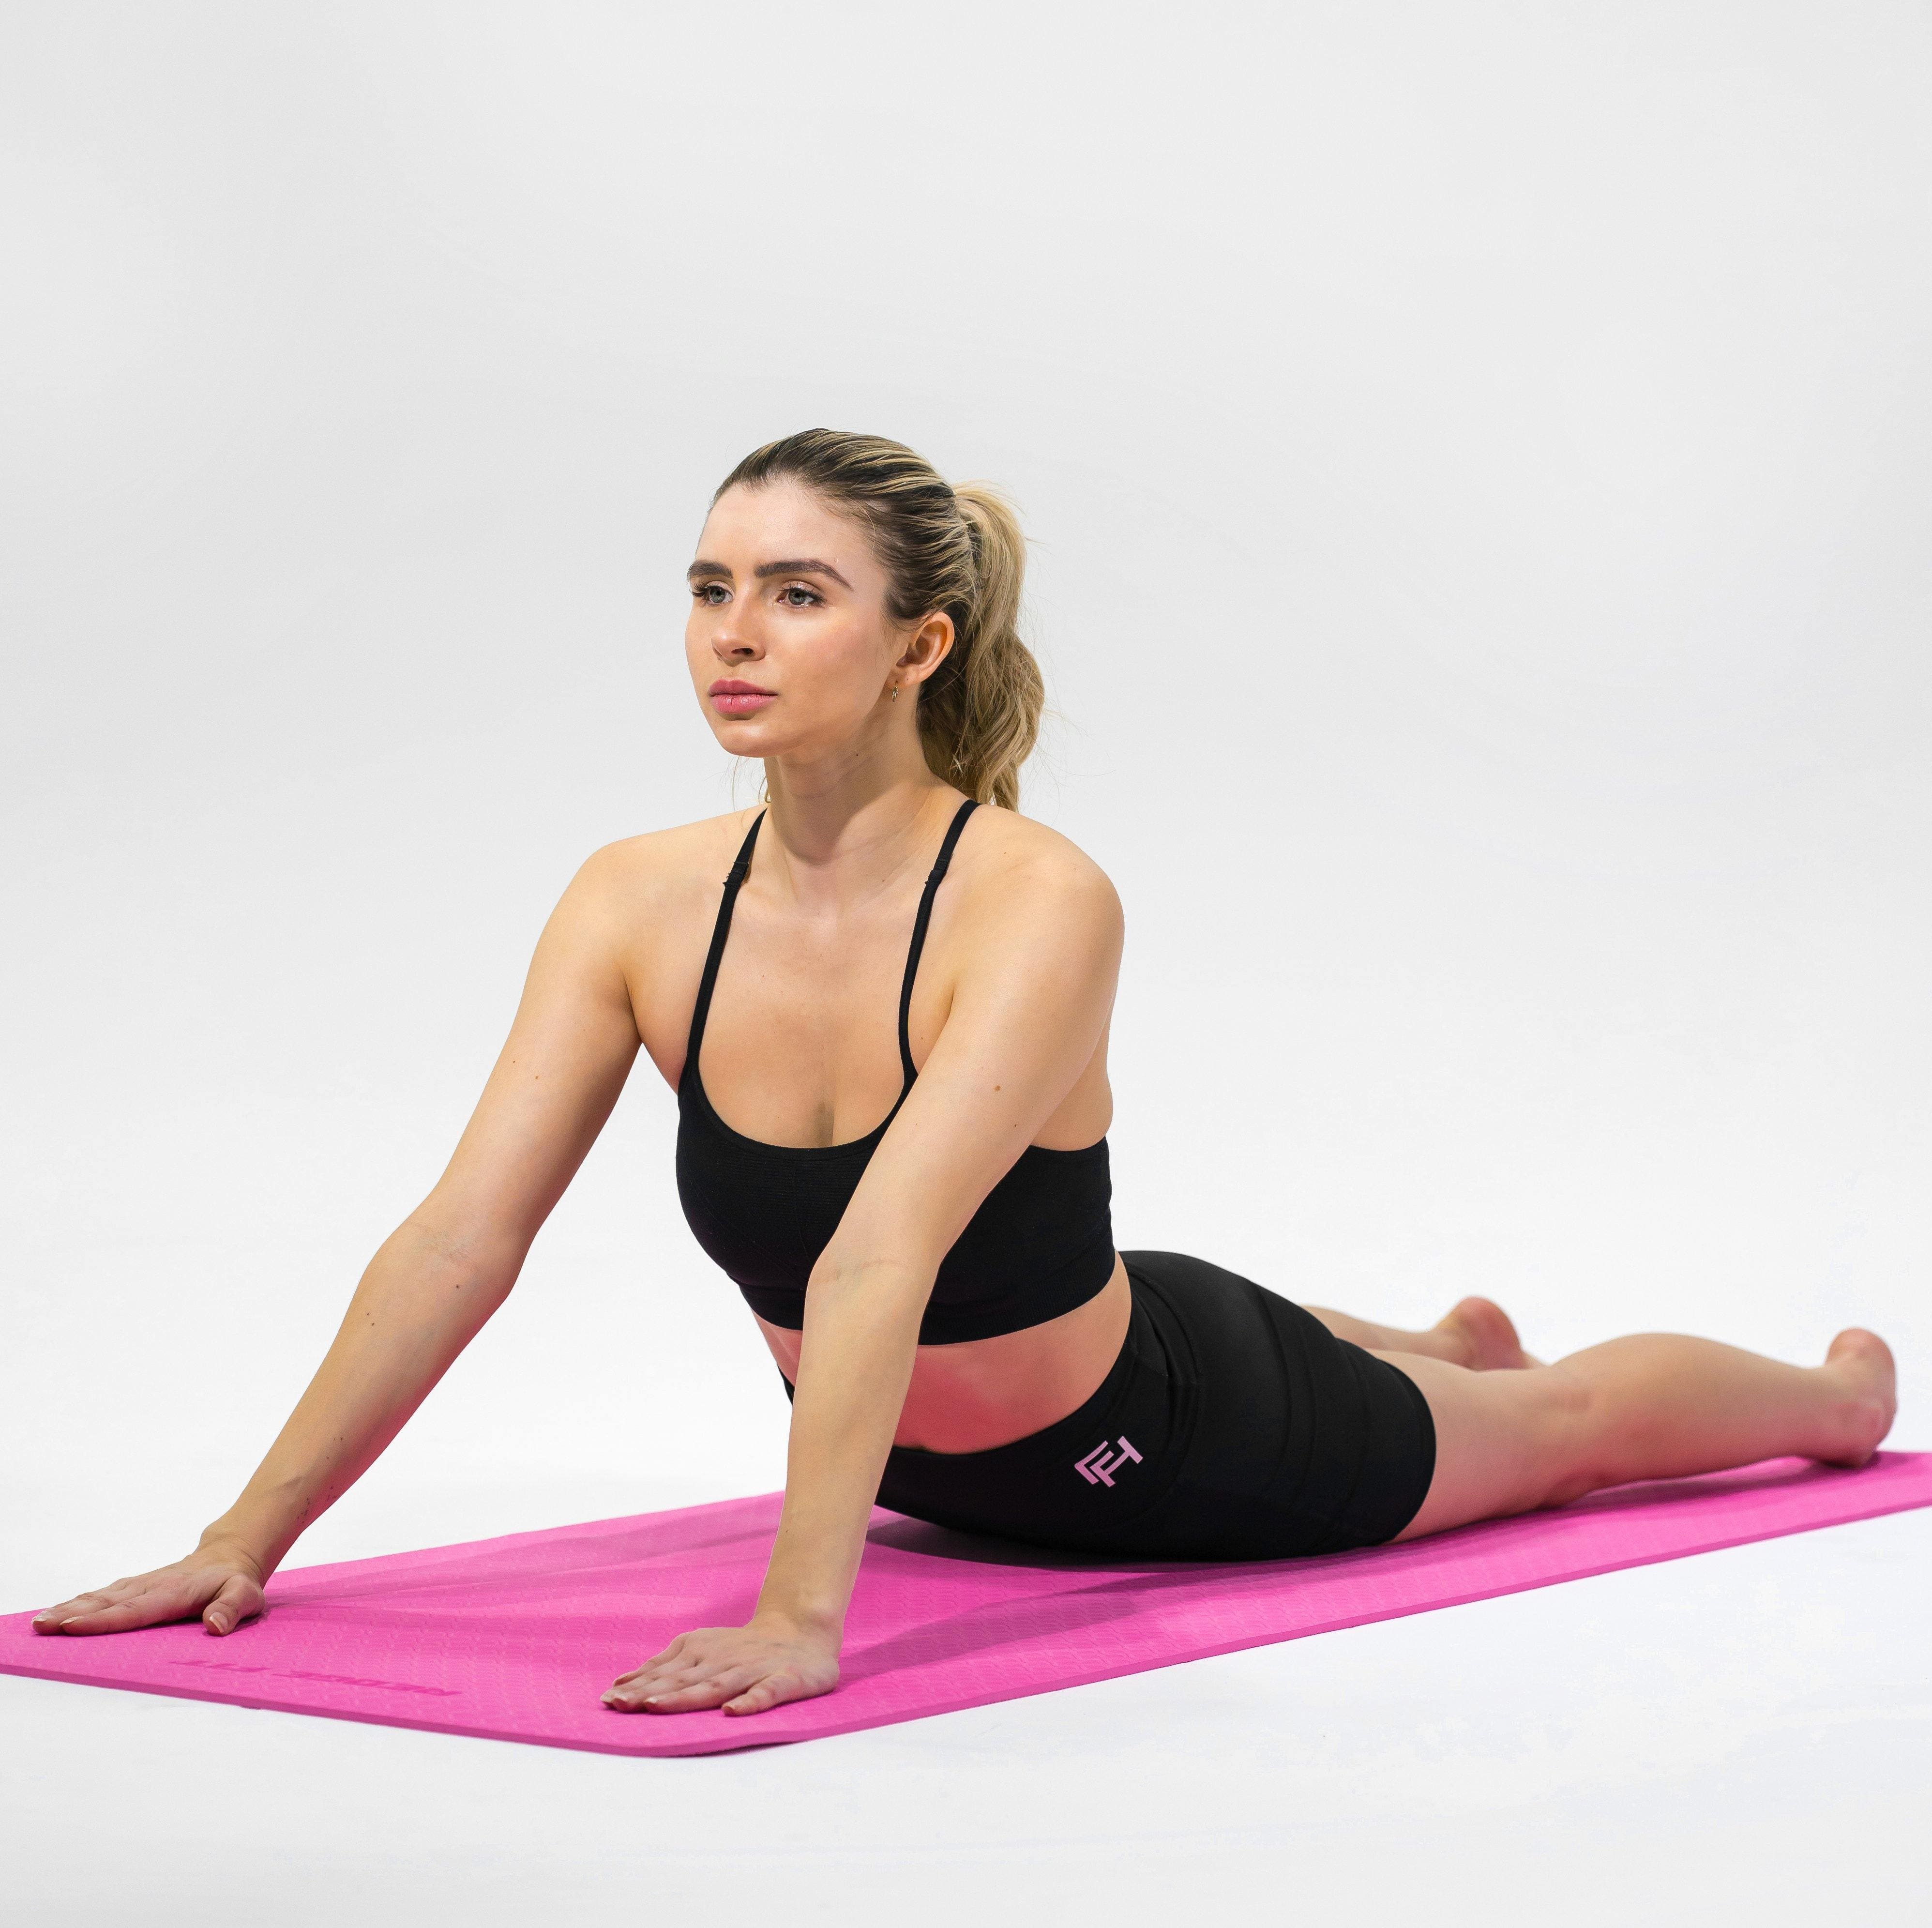 Woman modeling the Redge Fit Double Sided Workout Mat Available at https://www.getredge.com/products/redge-workout-mat